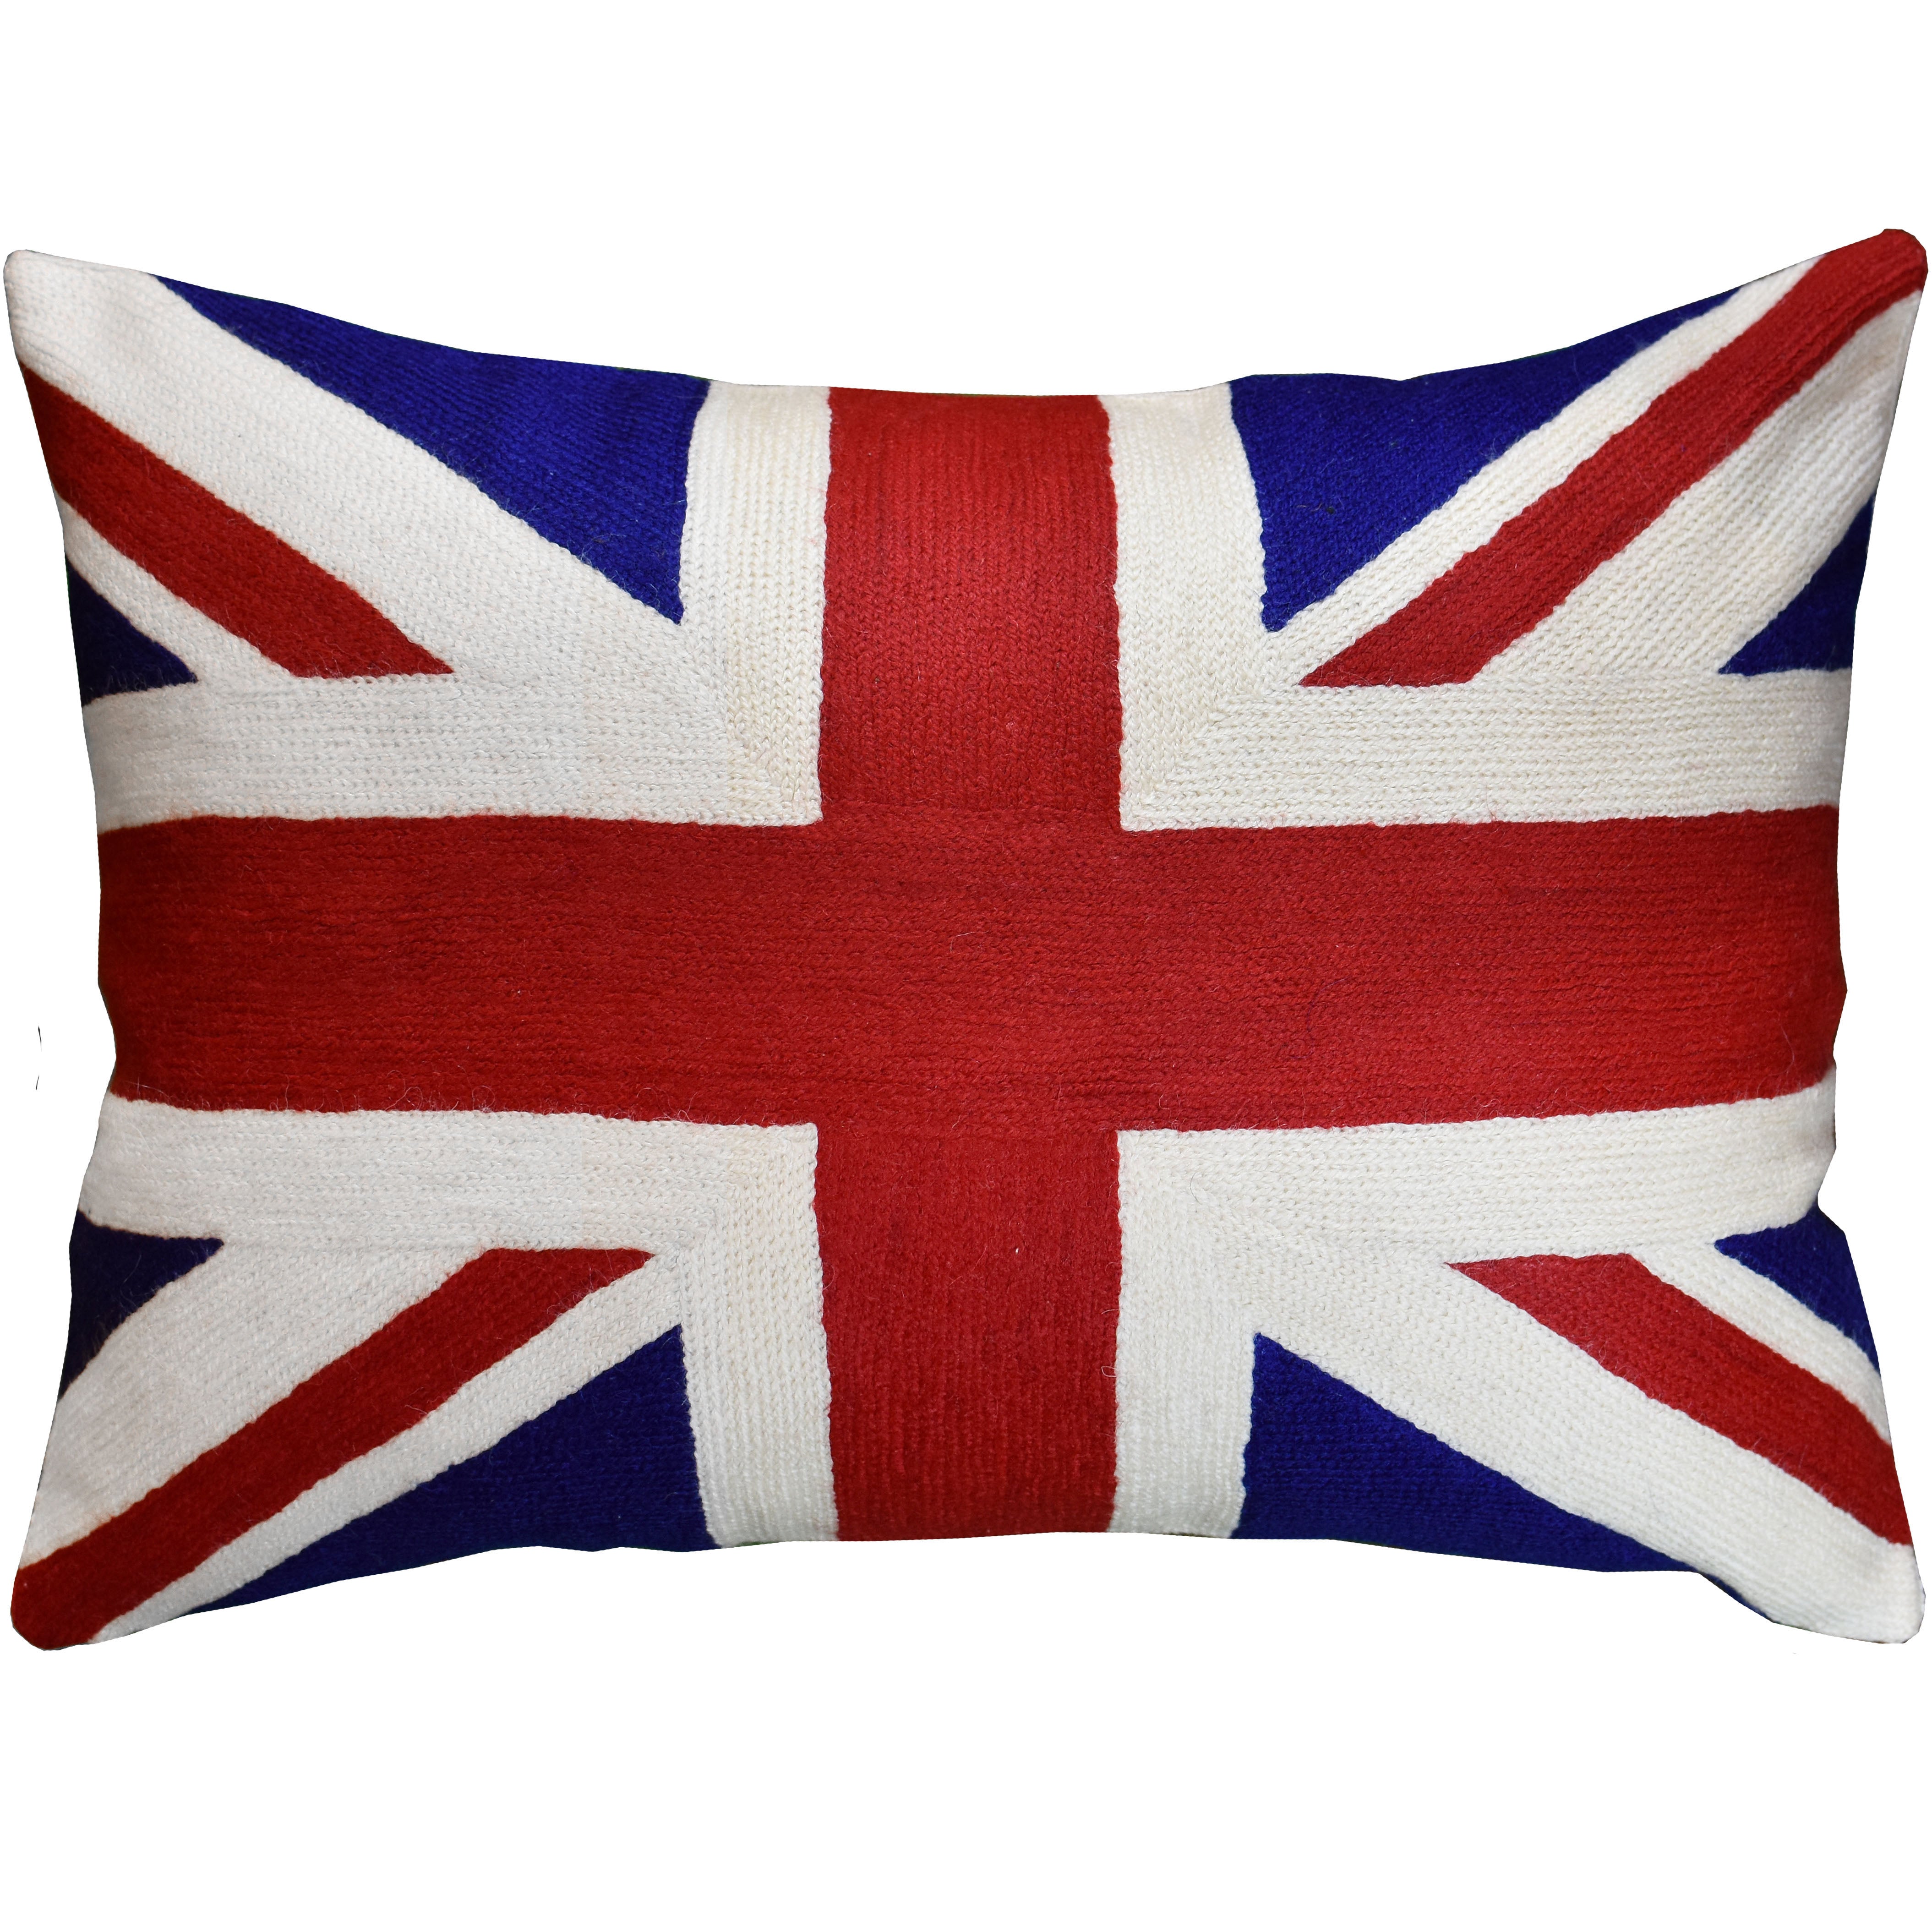 Small Union Jack floral pillow covers